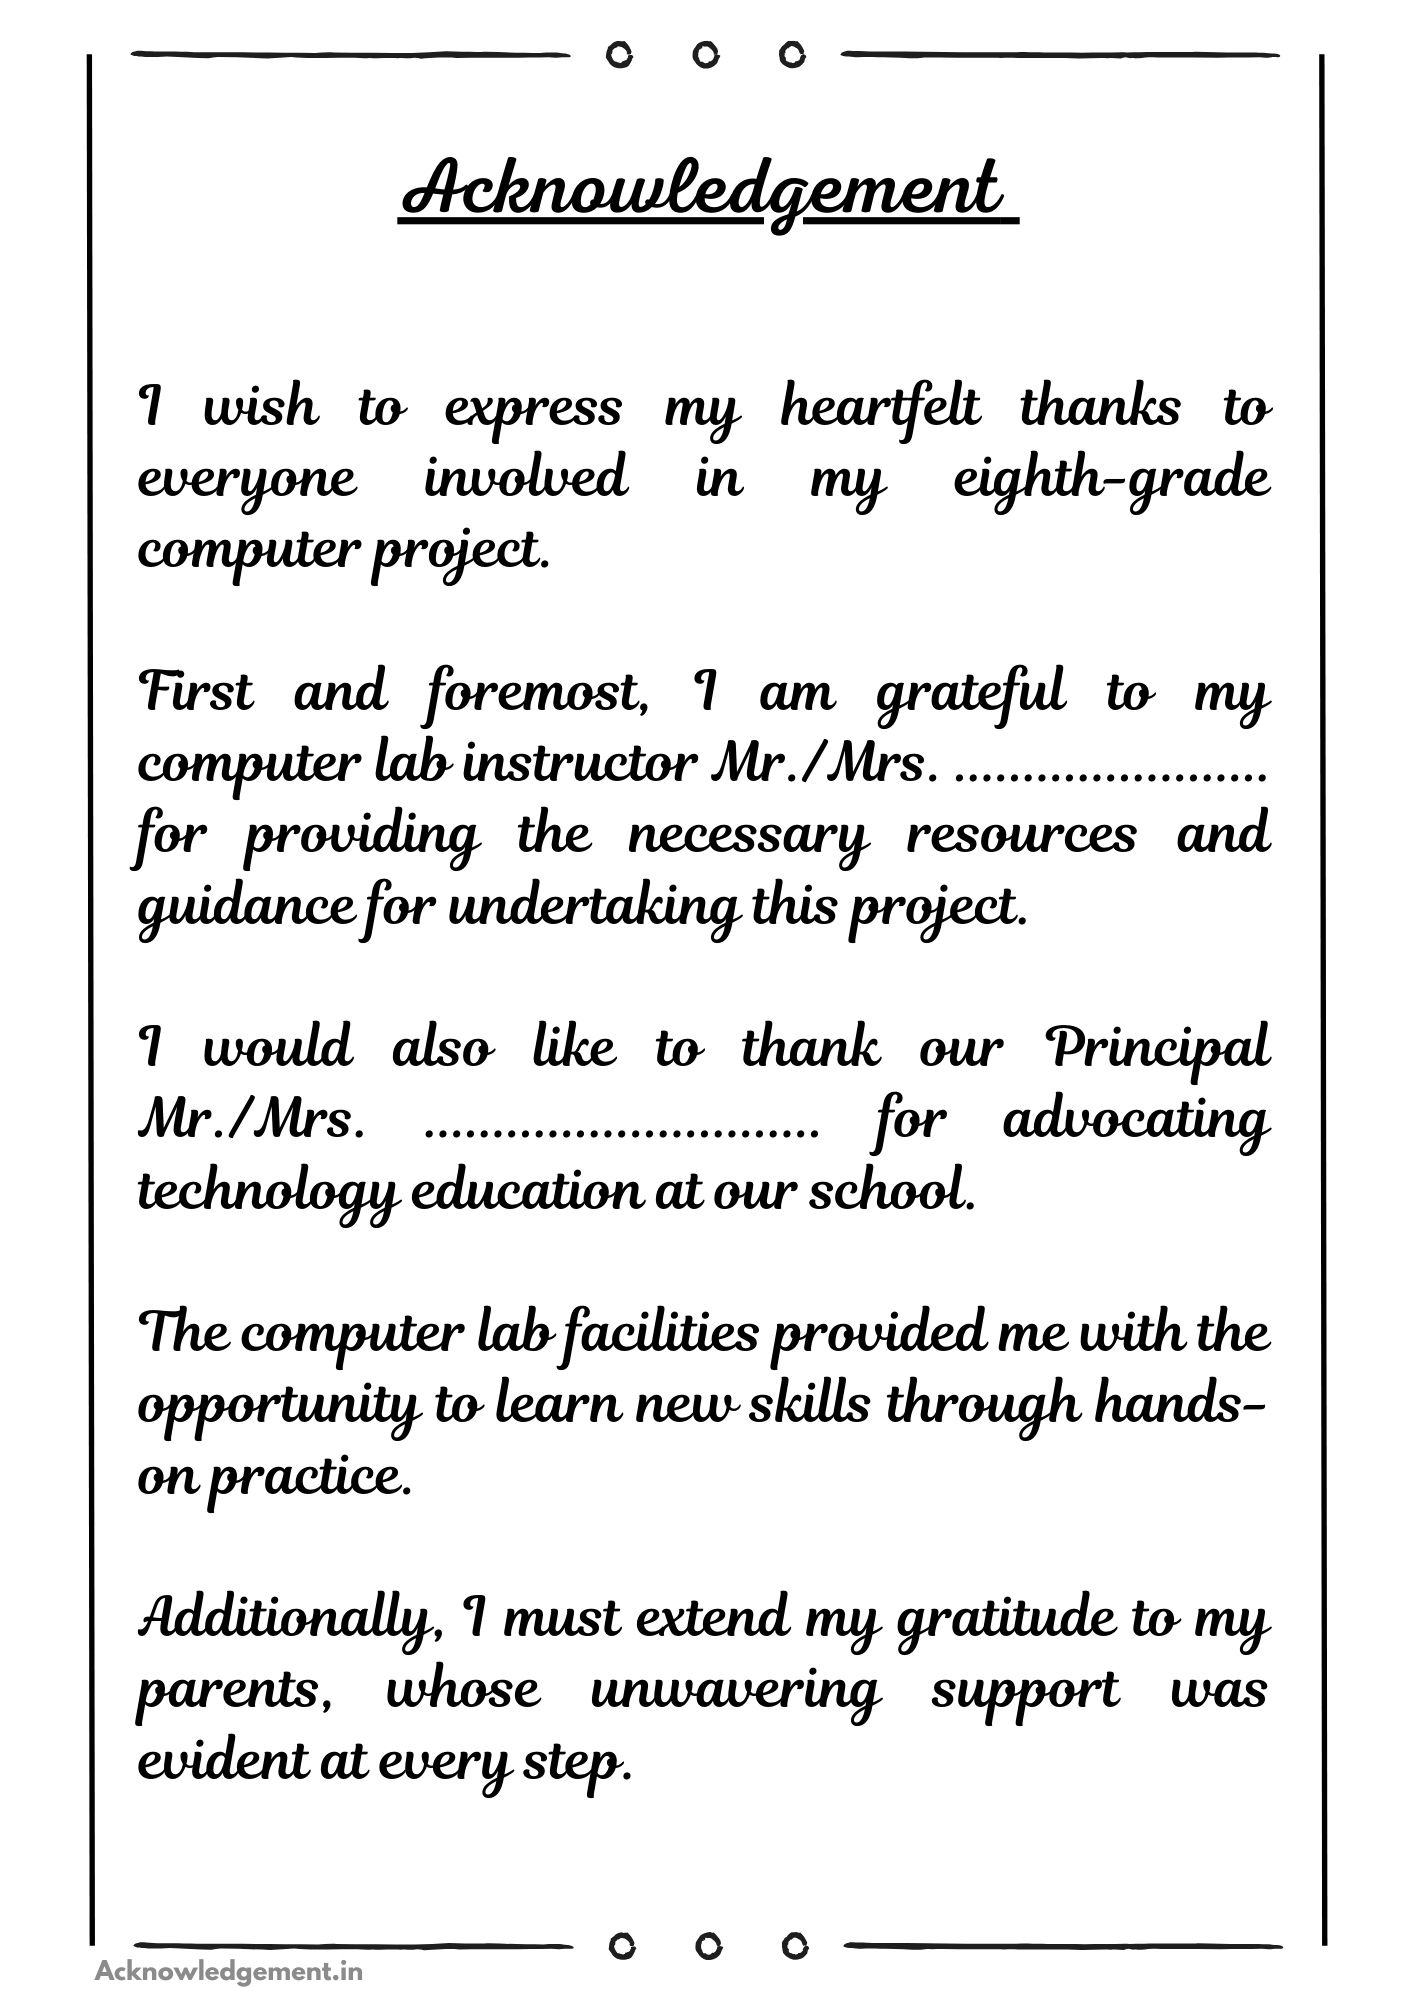 Acknowledgement for computer project